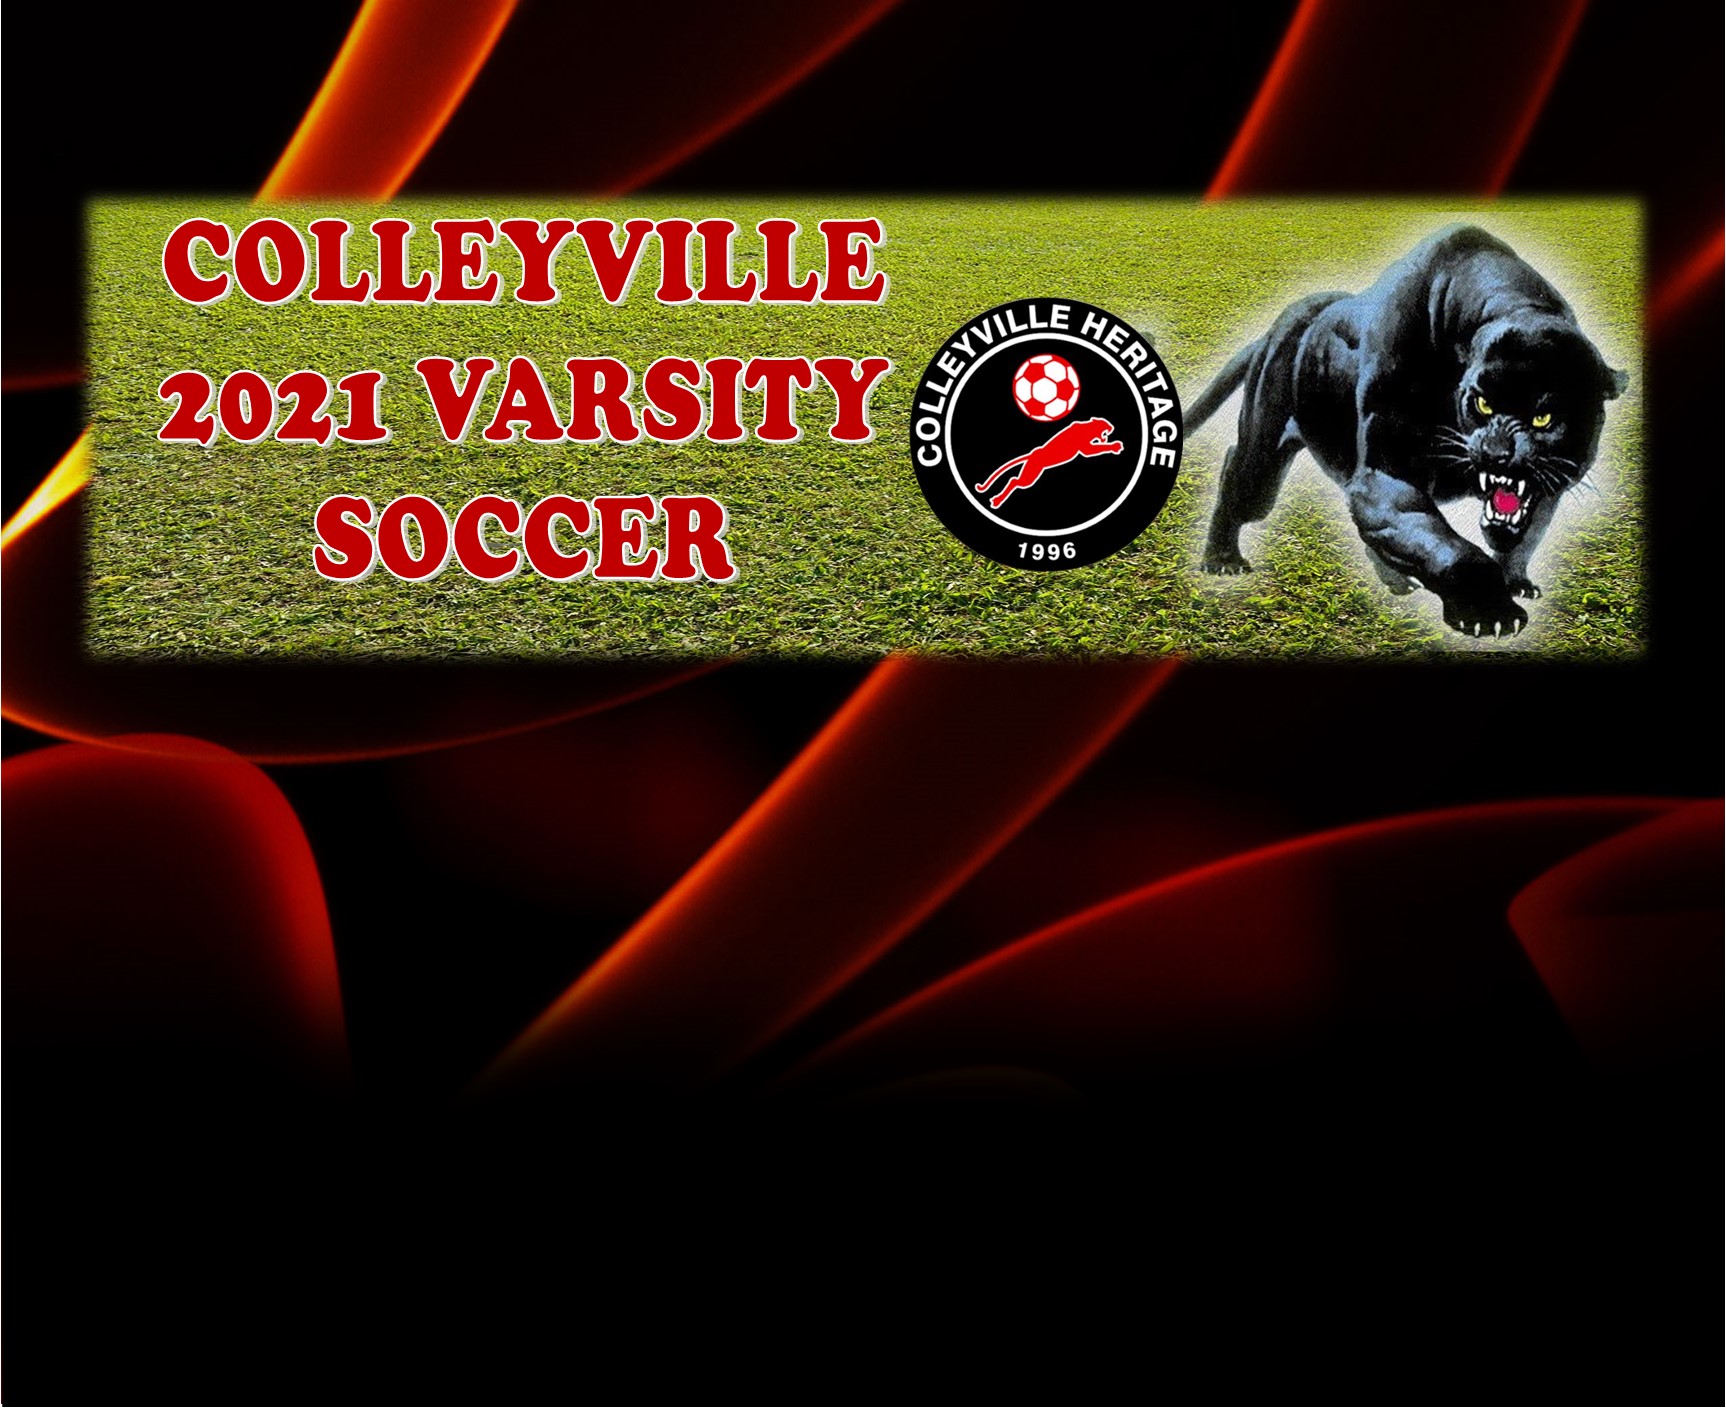 GCISD Soccer: Colleyville Panthers Top Palo Duro Dons 3-1 to Win Regional Semifinals Playoff Match